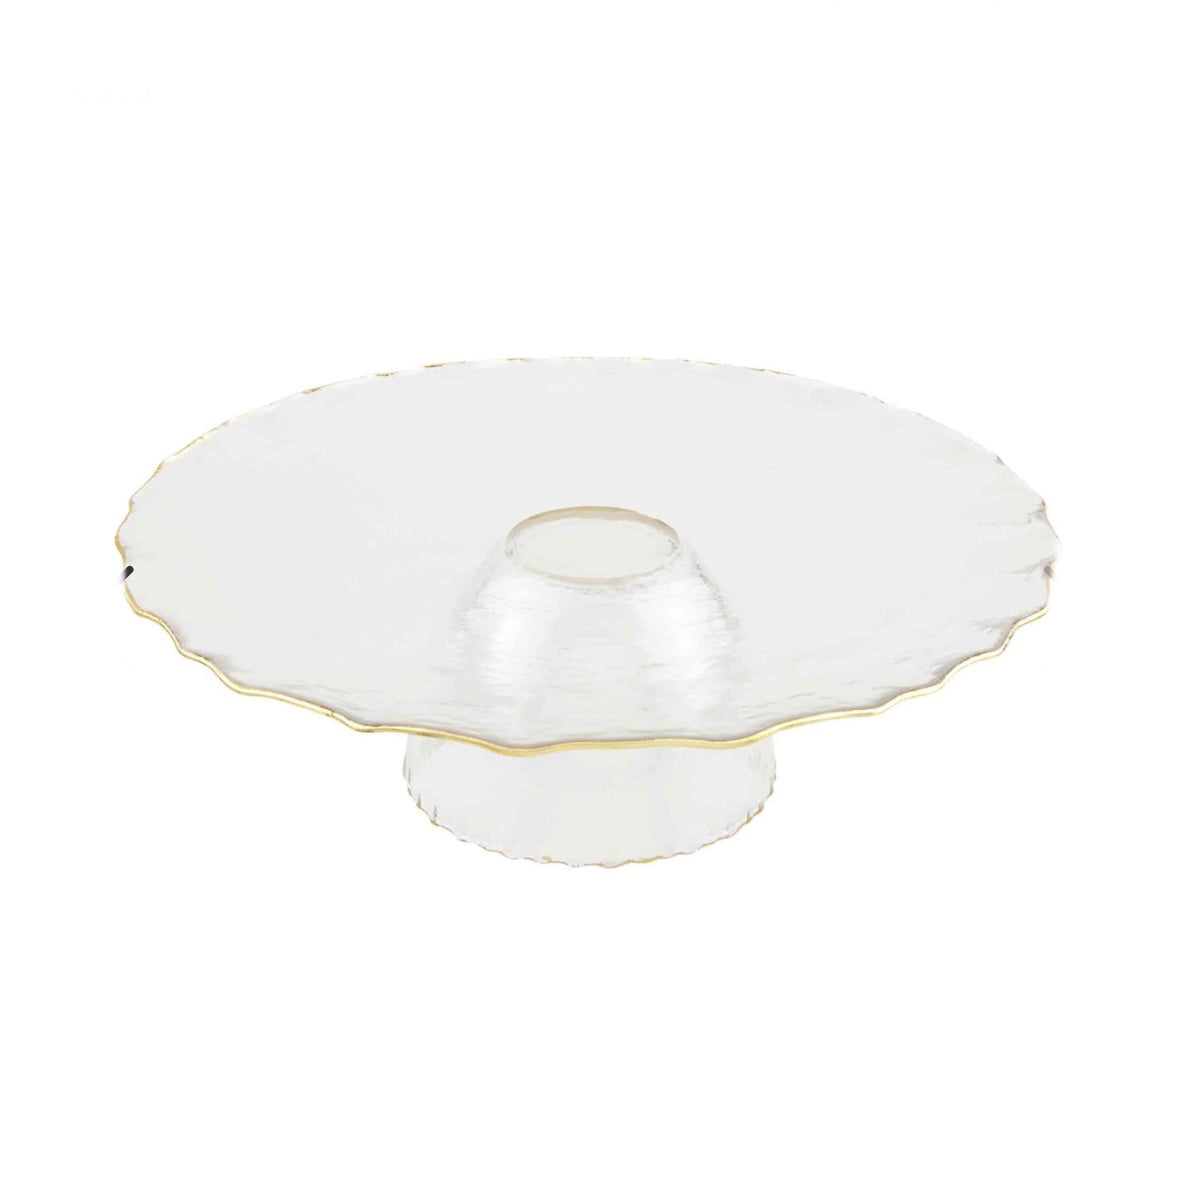 Glass Cake Stand / Chip and Dip bowl